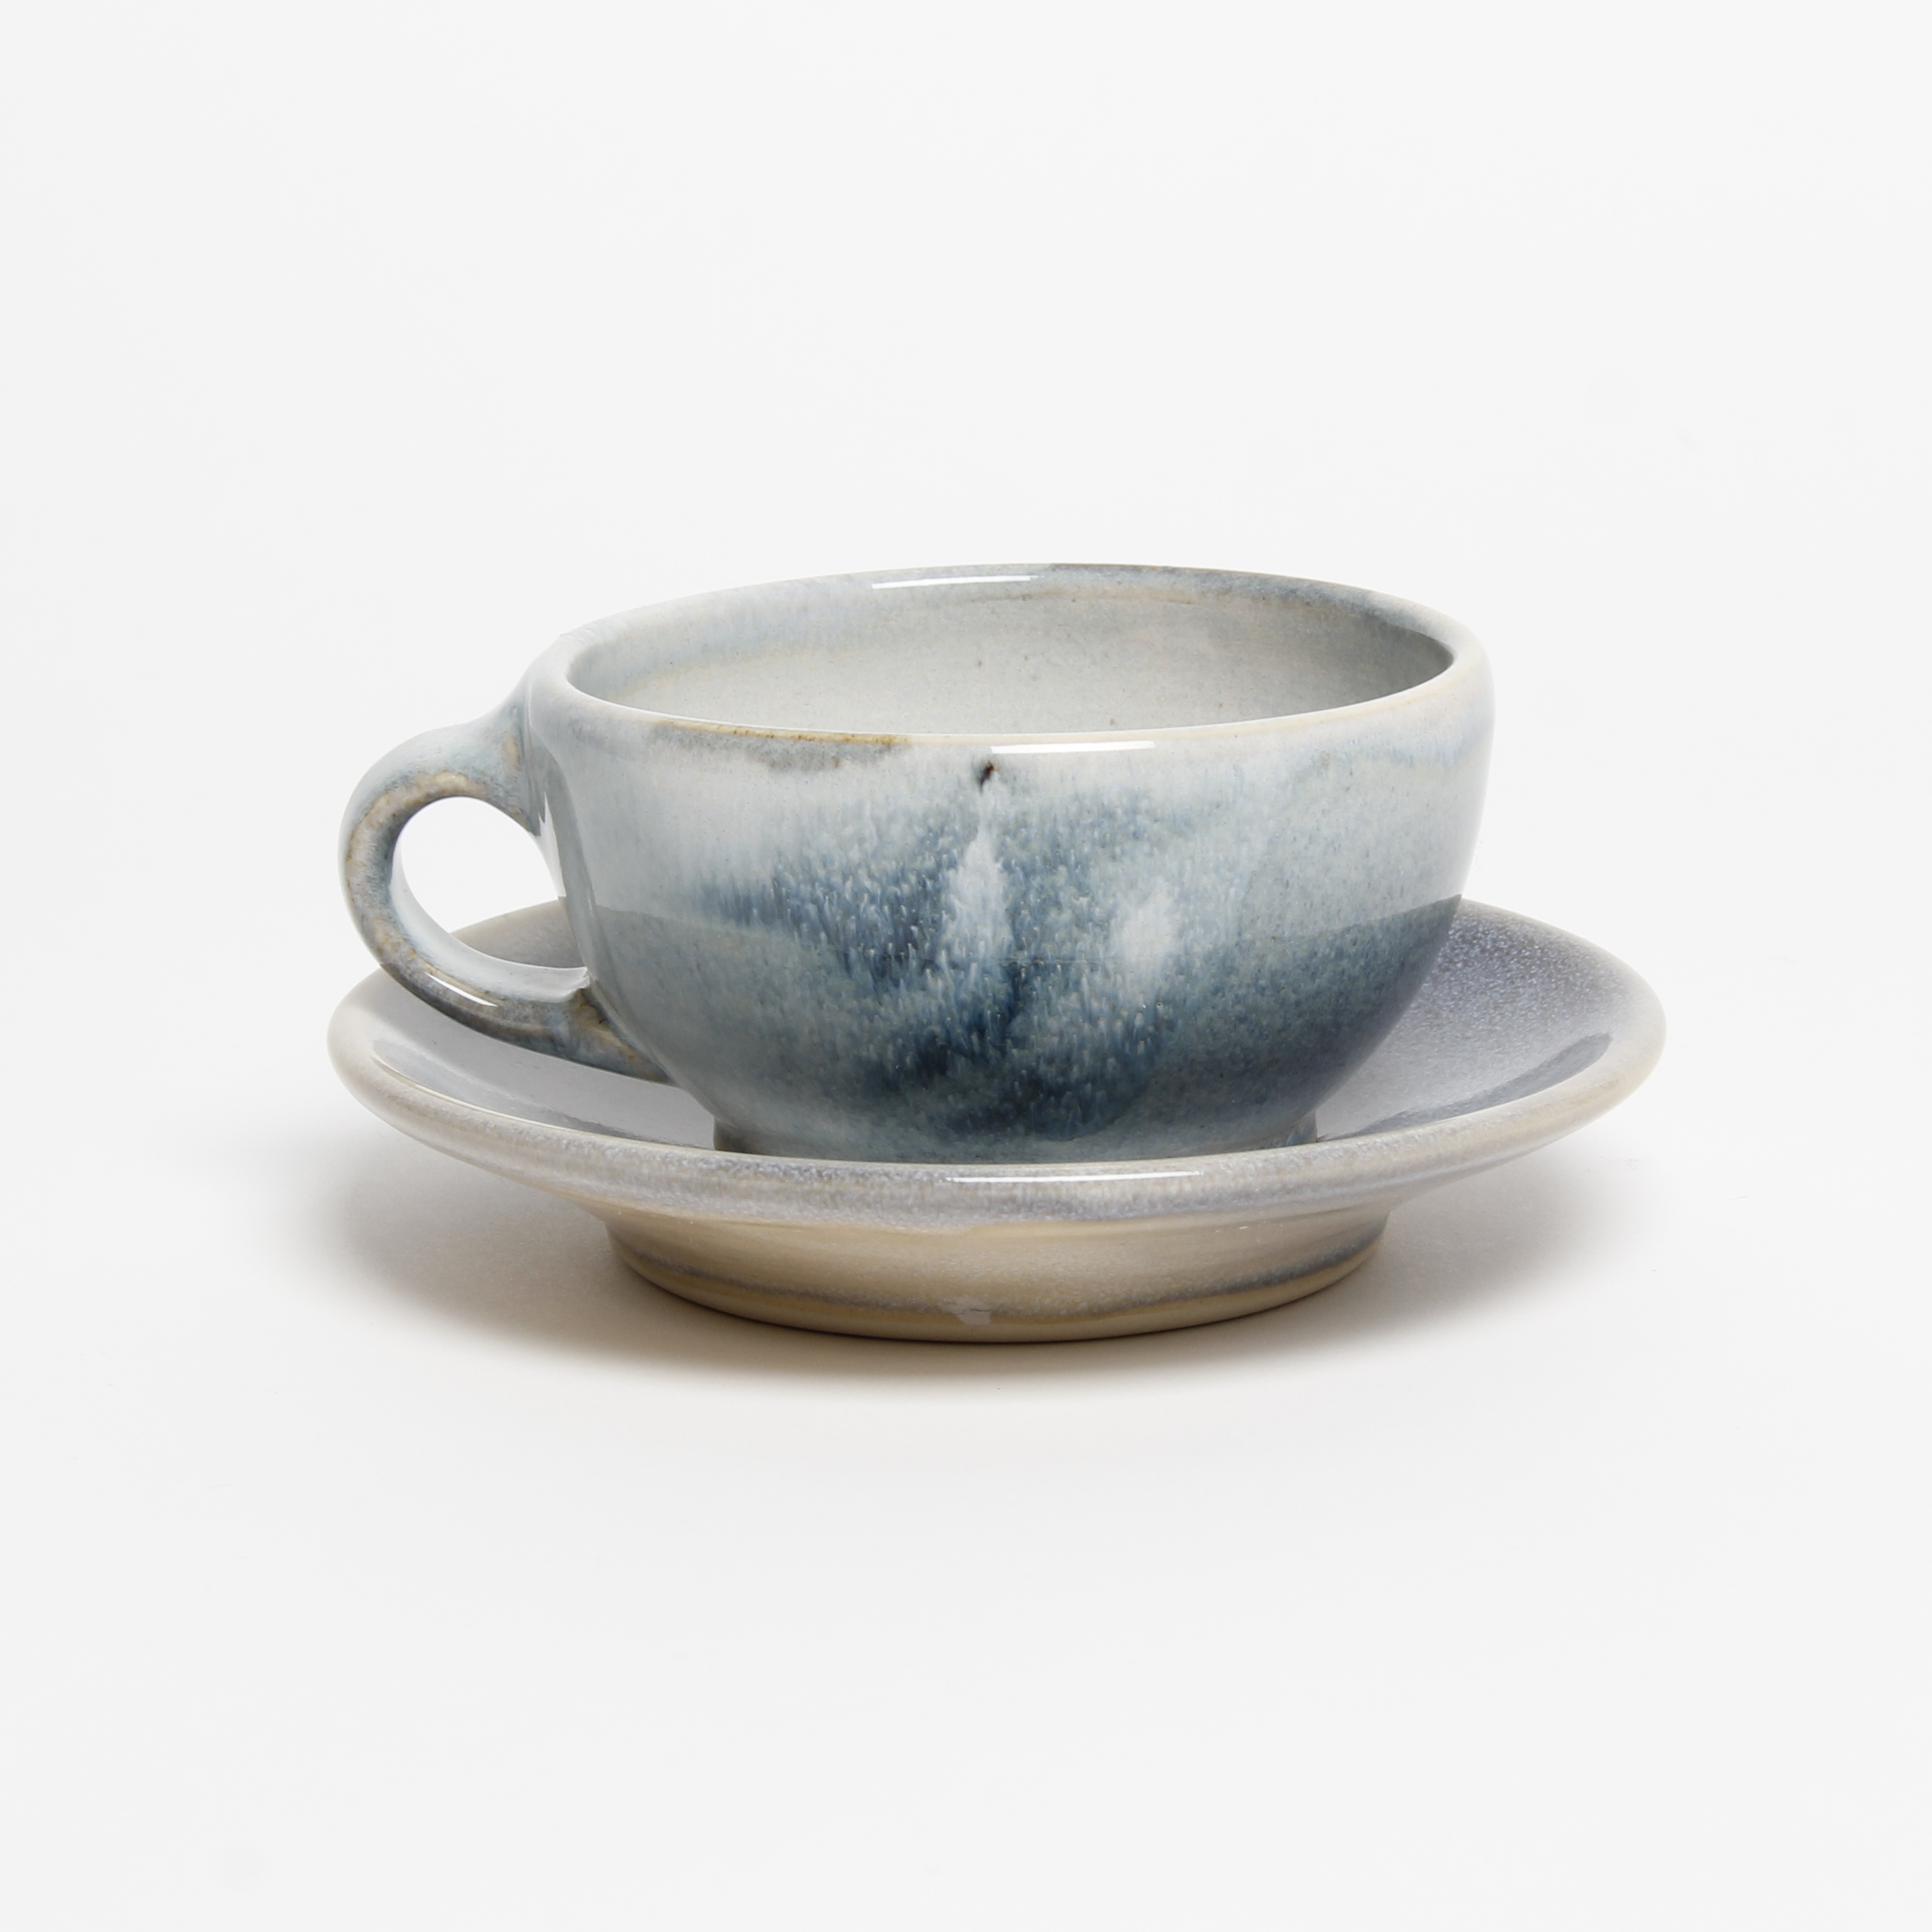 Teresa Dunlop: Cappuccino Cup Product Image 1 of 6